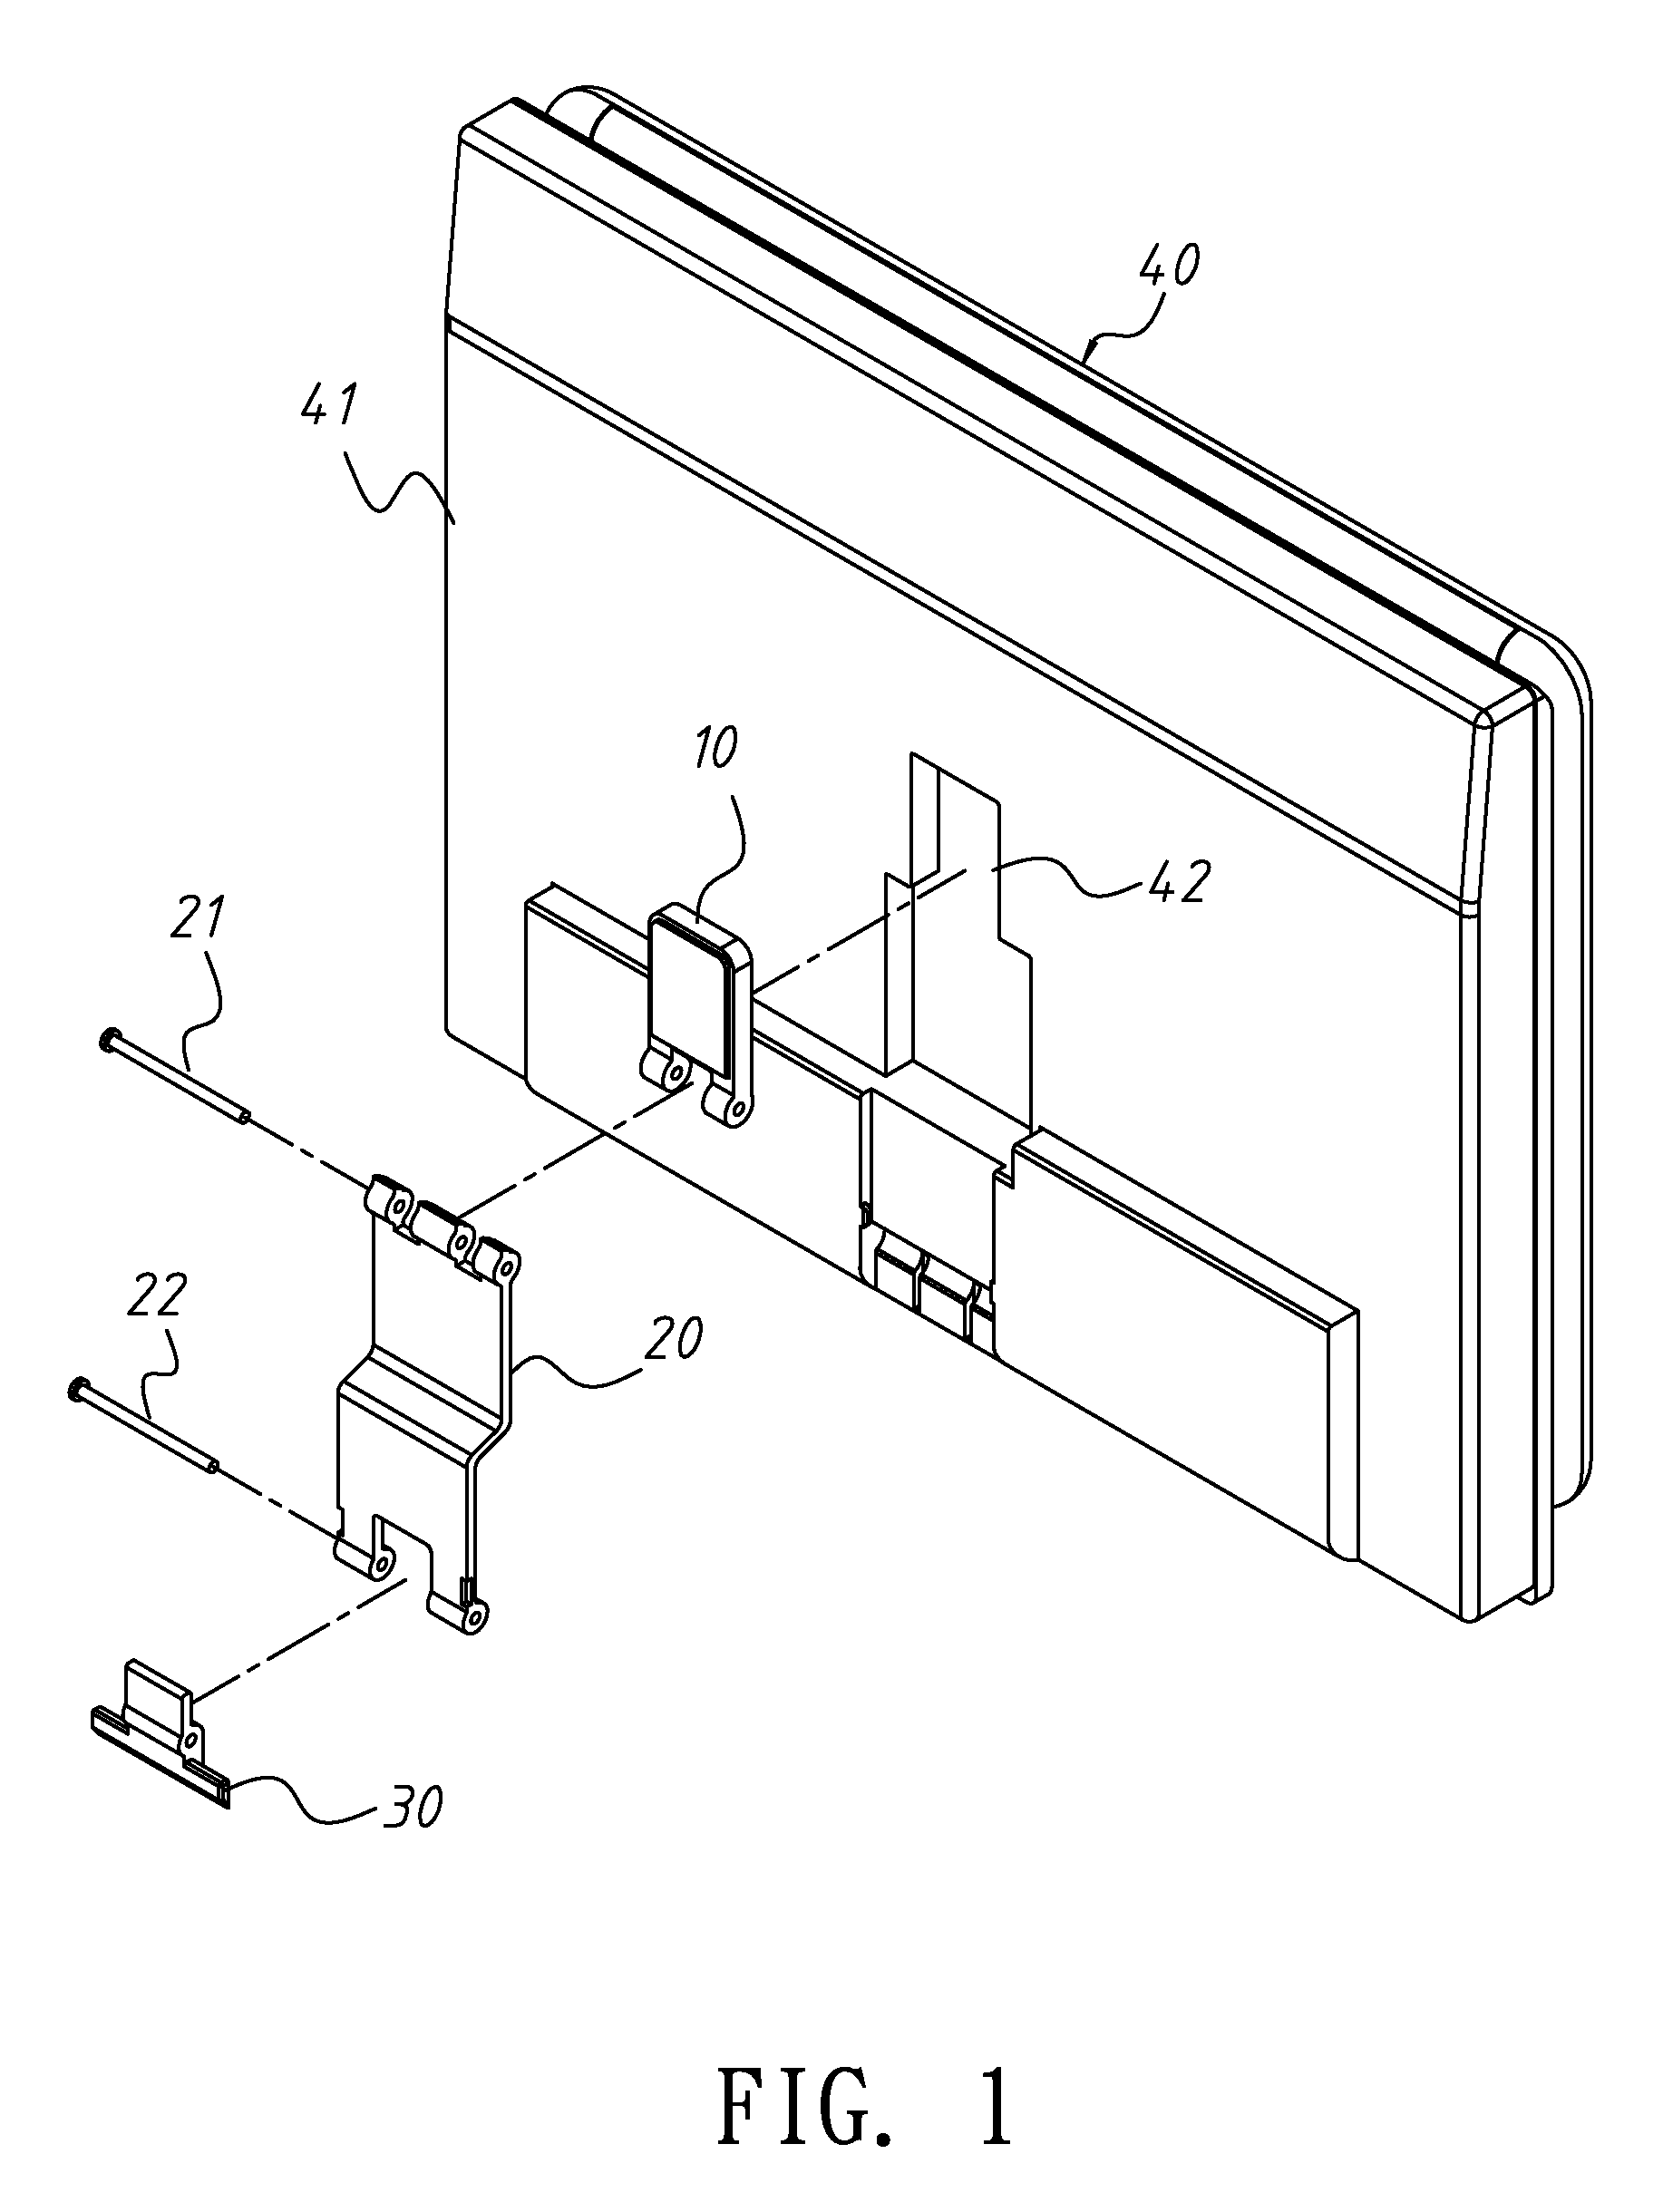 Electronic device with magnetic supporting structure